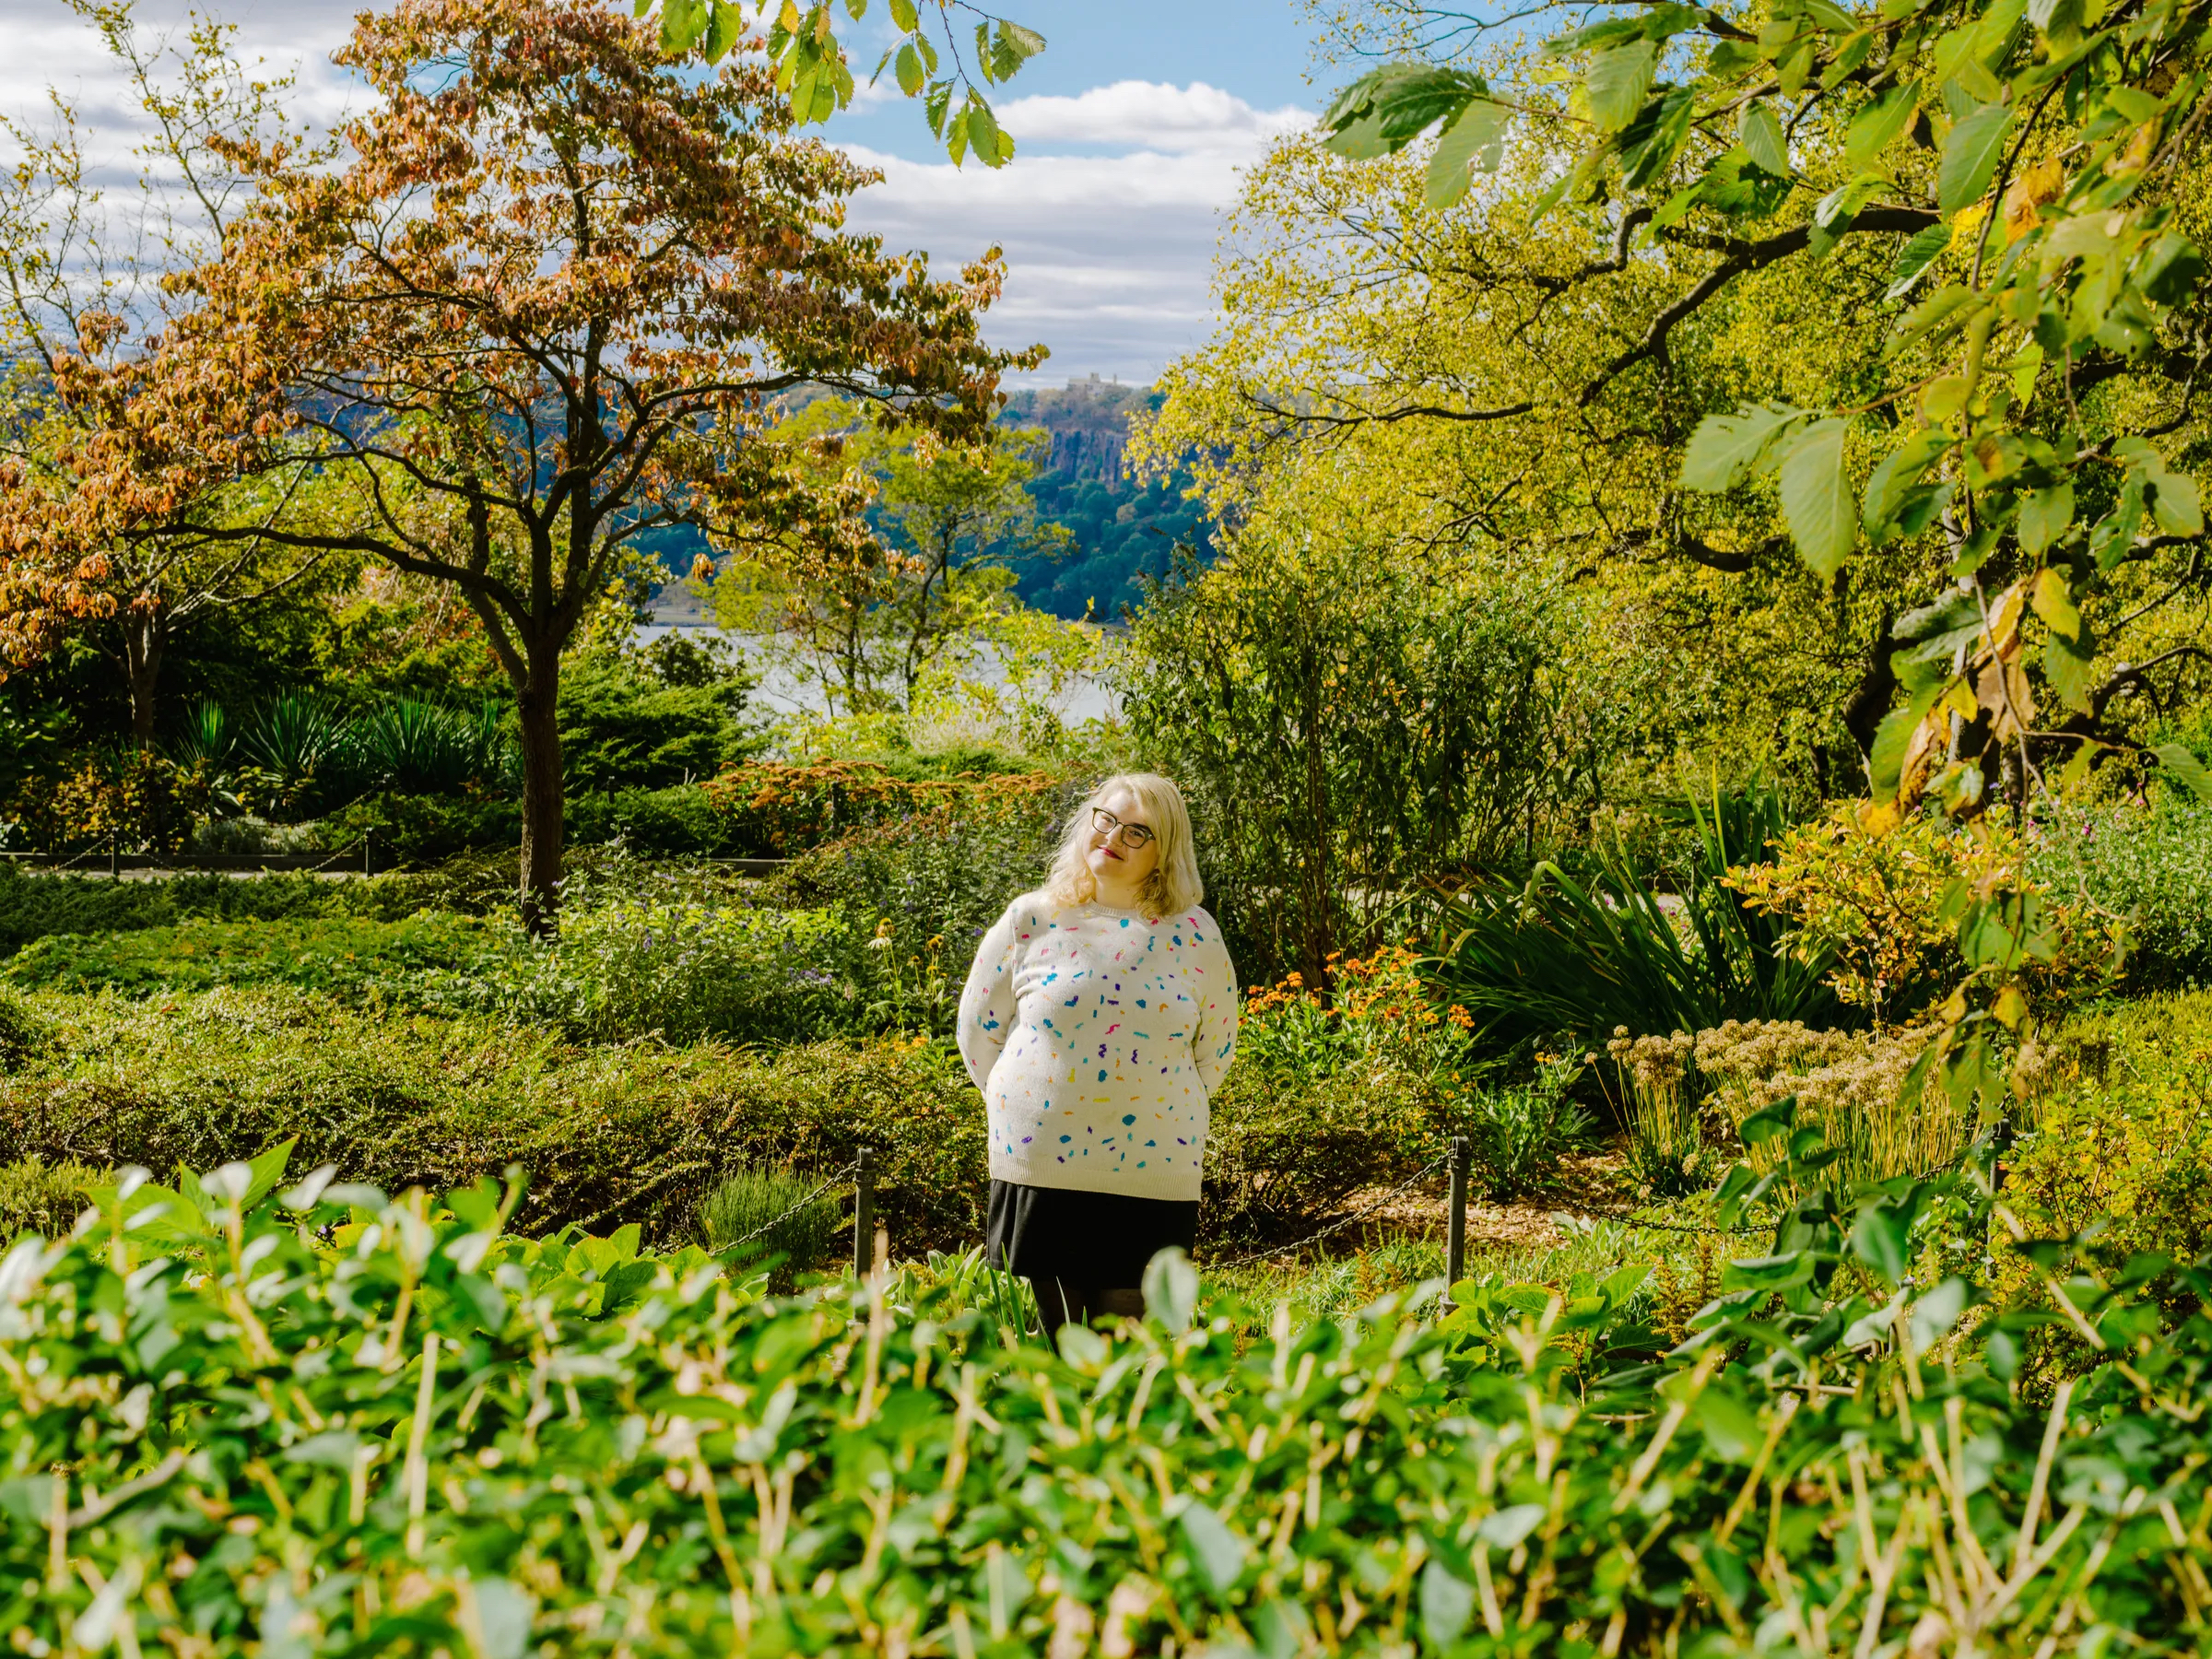 A photo of Amber Discko standing in a garden surrounded by green trees and bushes.